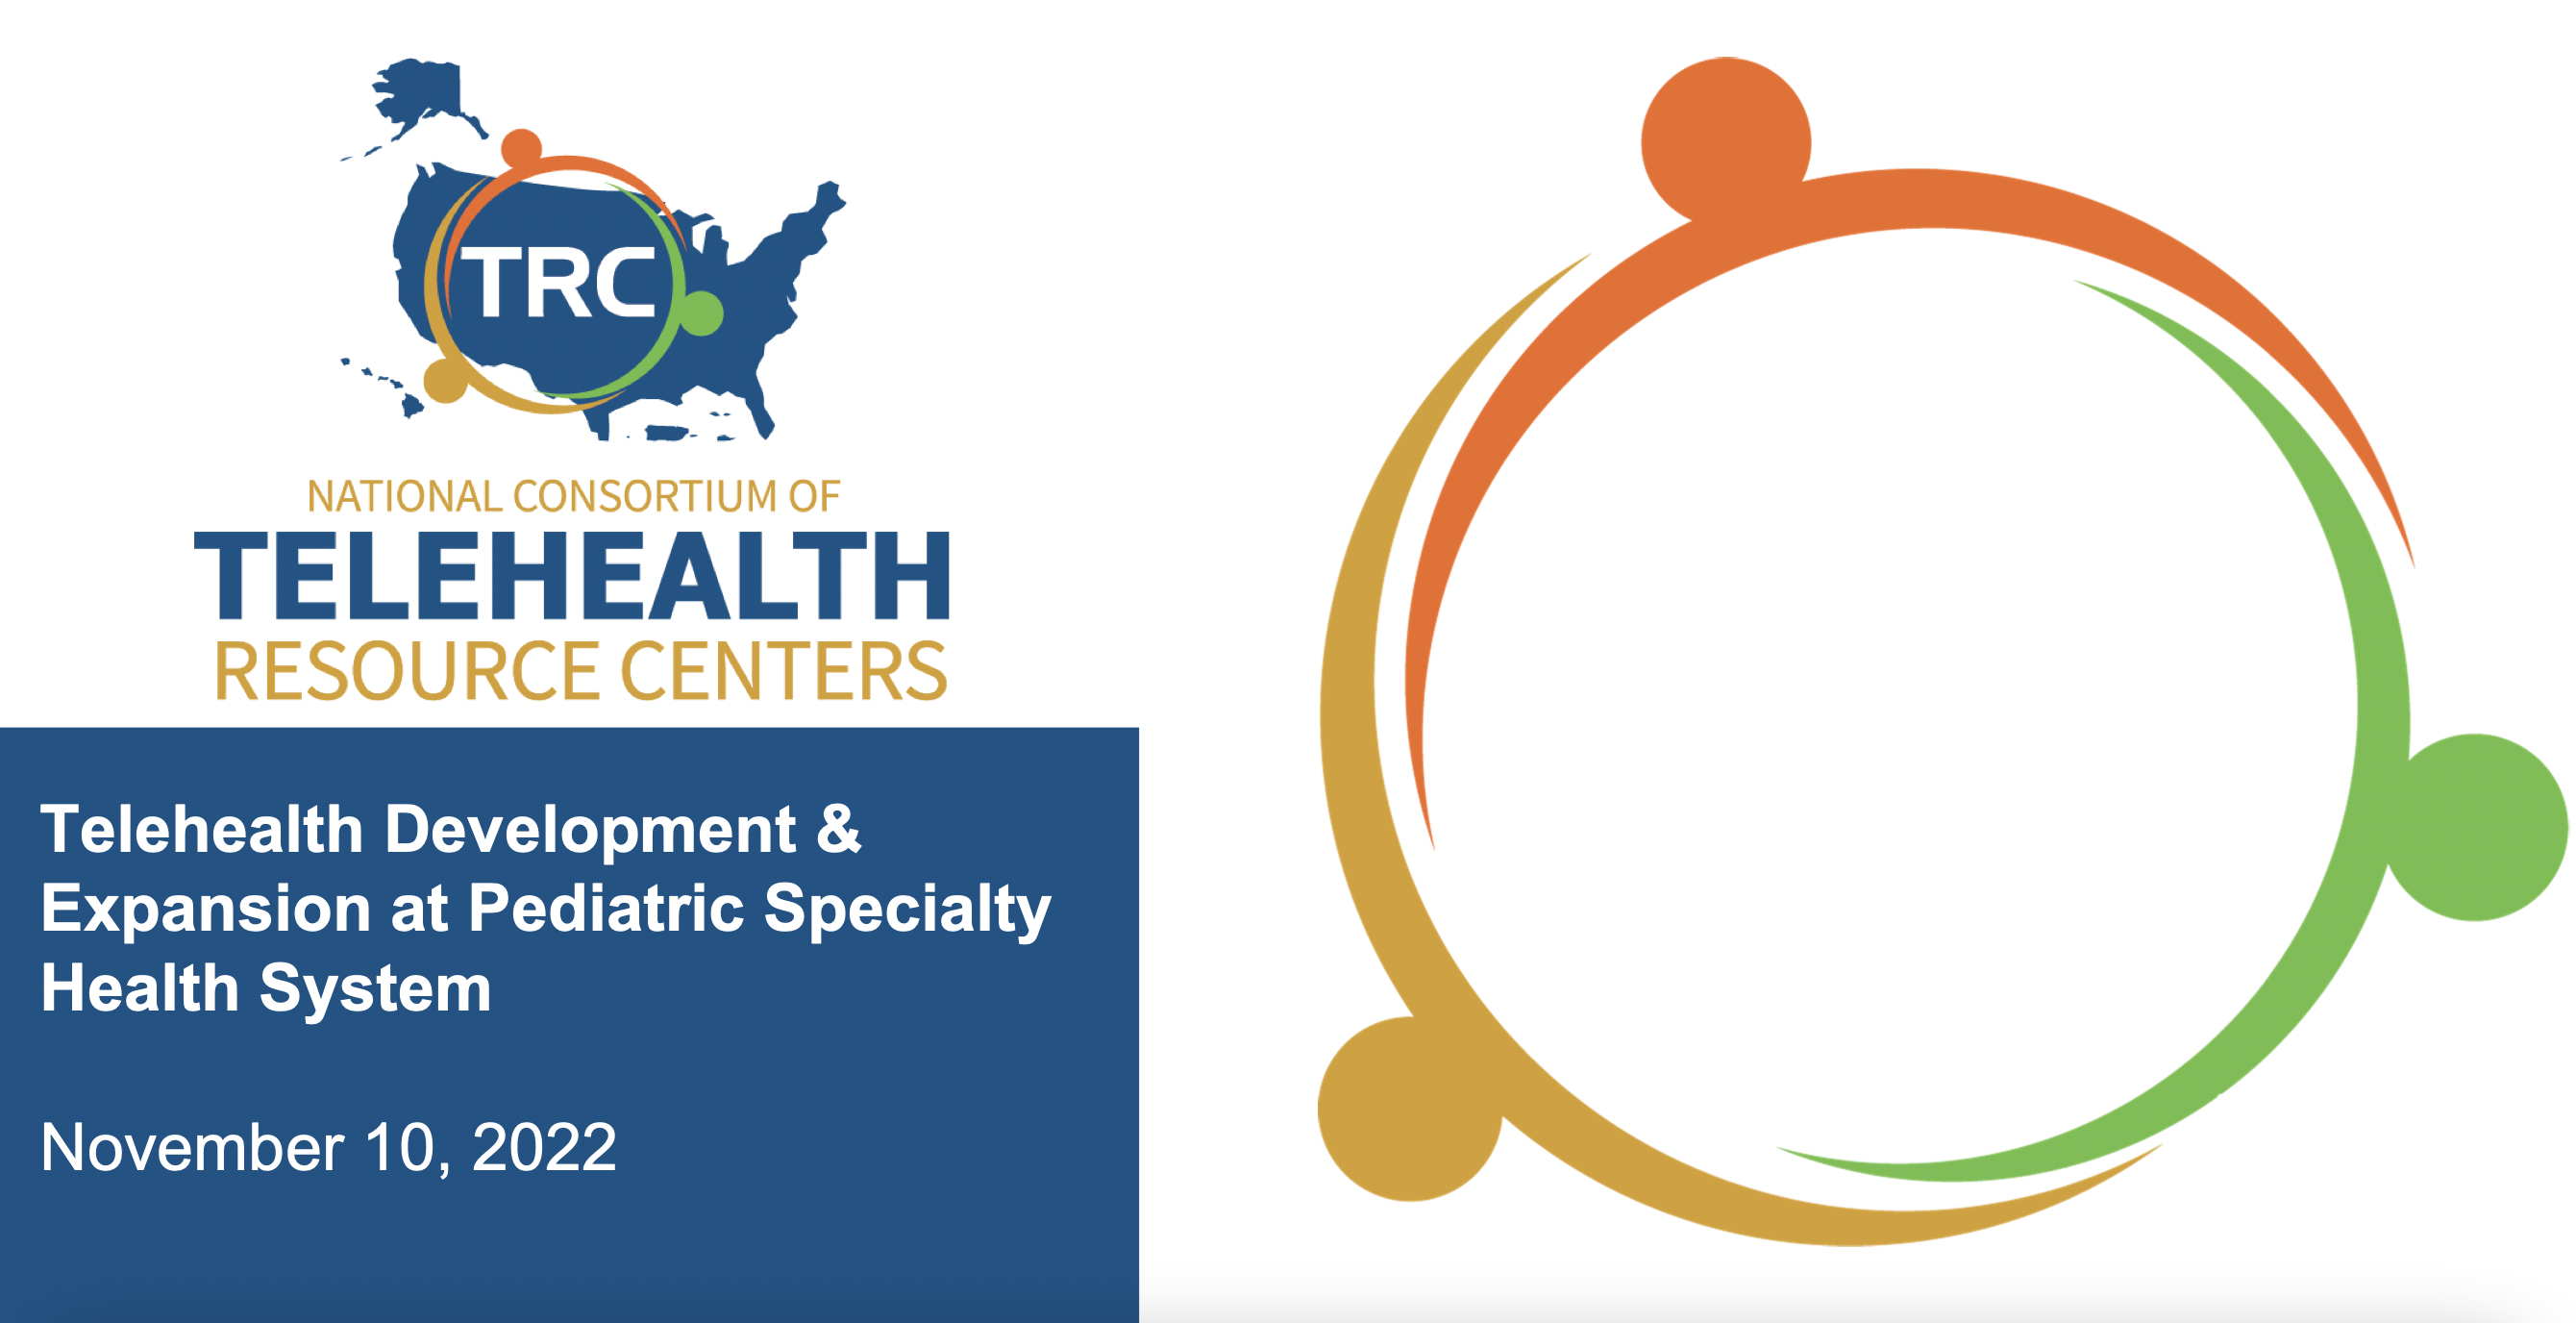 Telehealth Development and Expansion at Specialty Pediatric Health System thumbnail image.